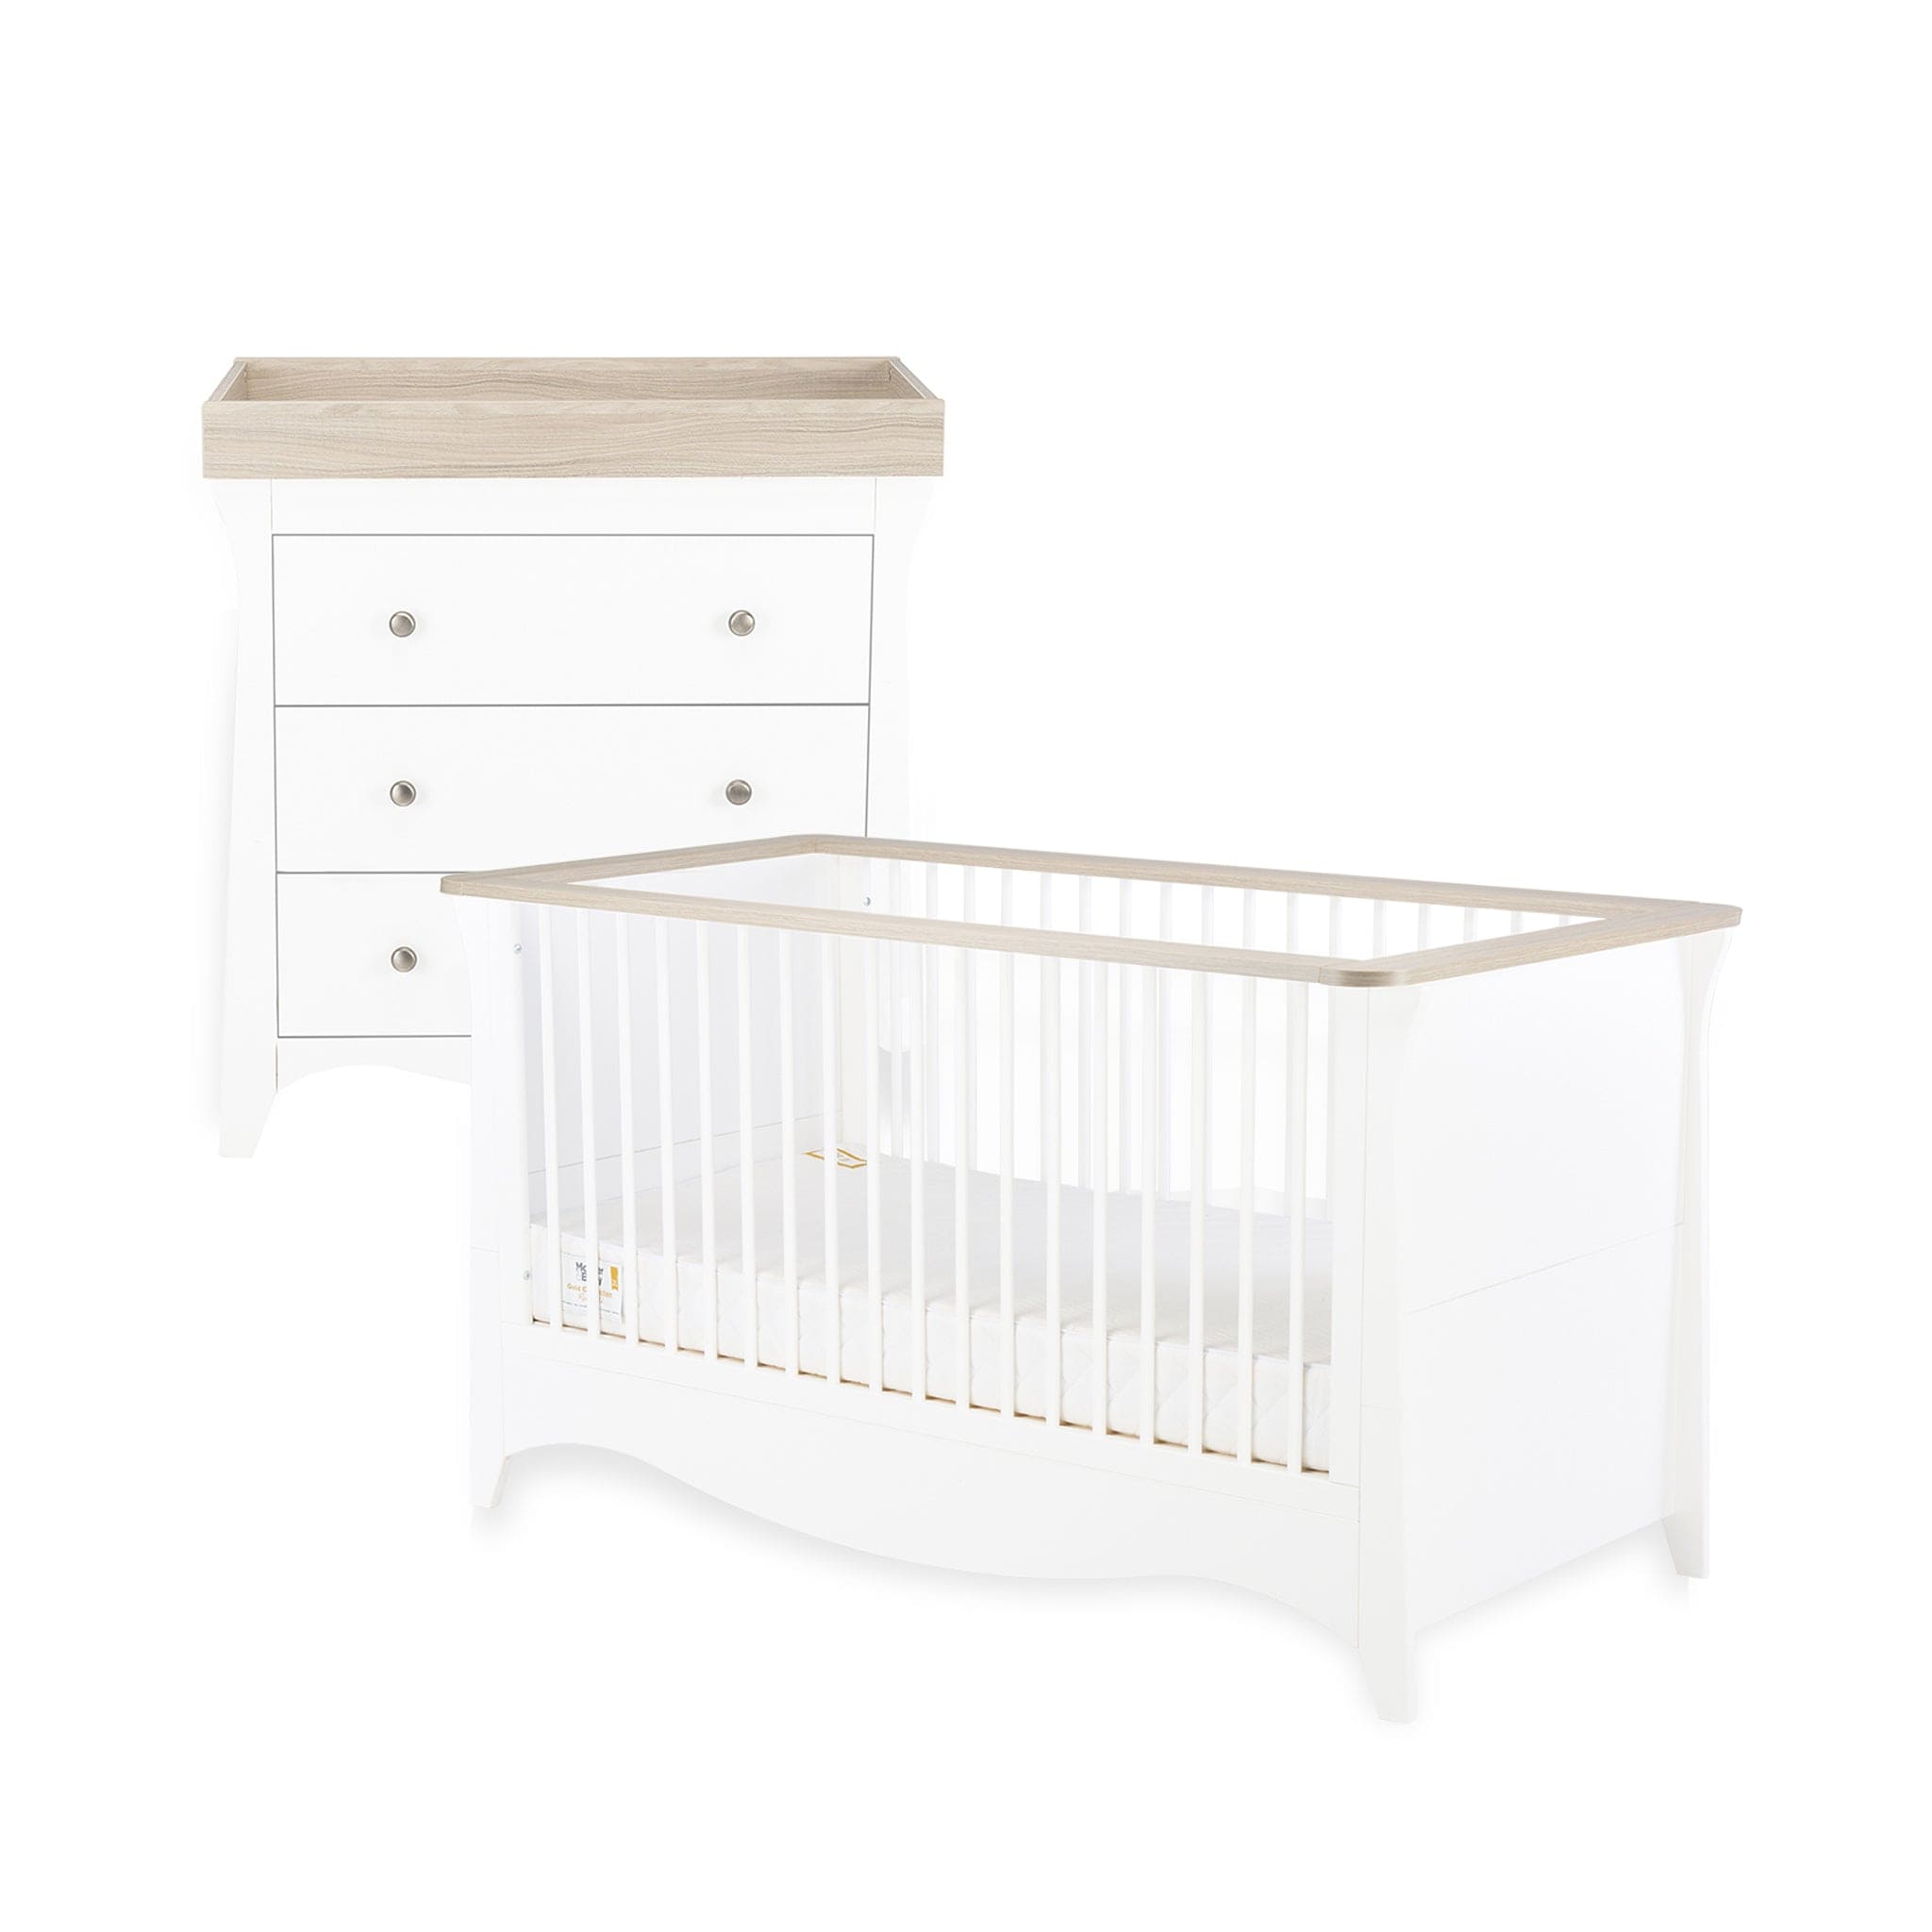 CuddleCo Nursery Room Sets CuddleCo Clara 2Pc Cot Bed Set in White & Ash